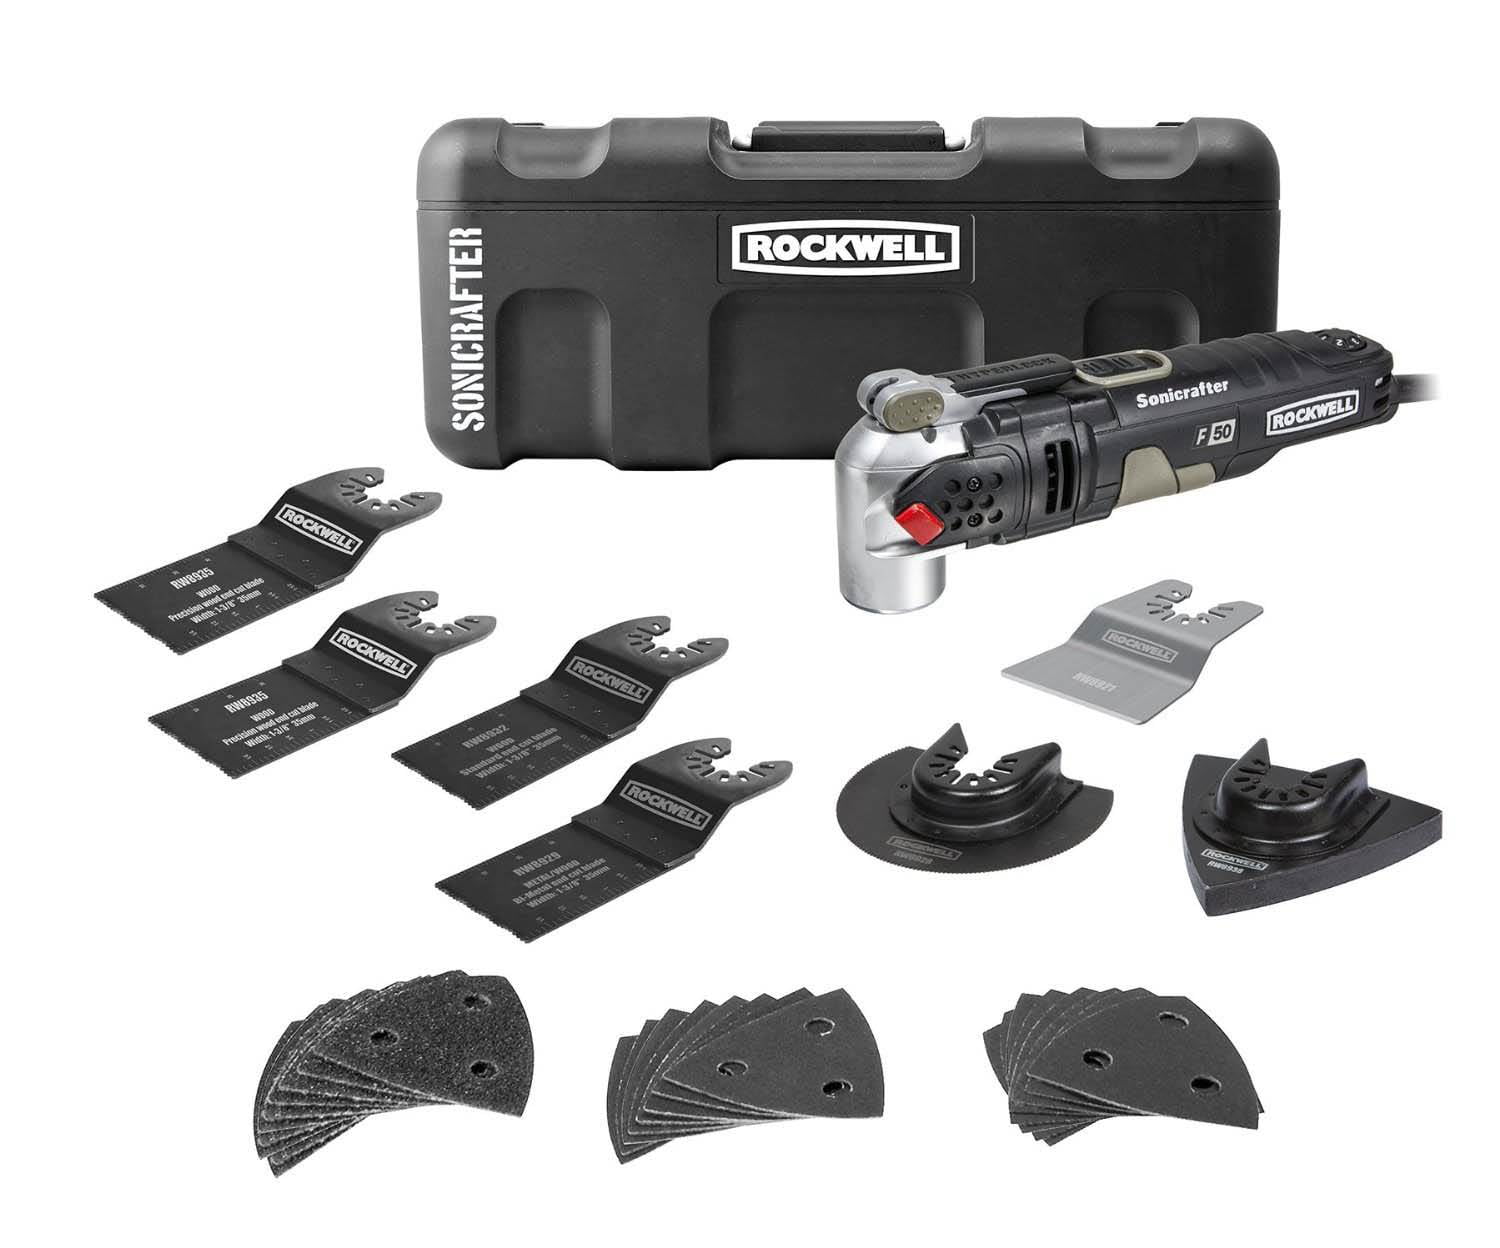 Rockwell RK5141K Sonicrafter F50 4.0 Amp Oscillating Multi-Tool 